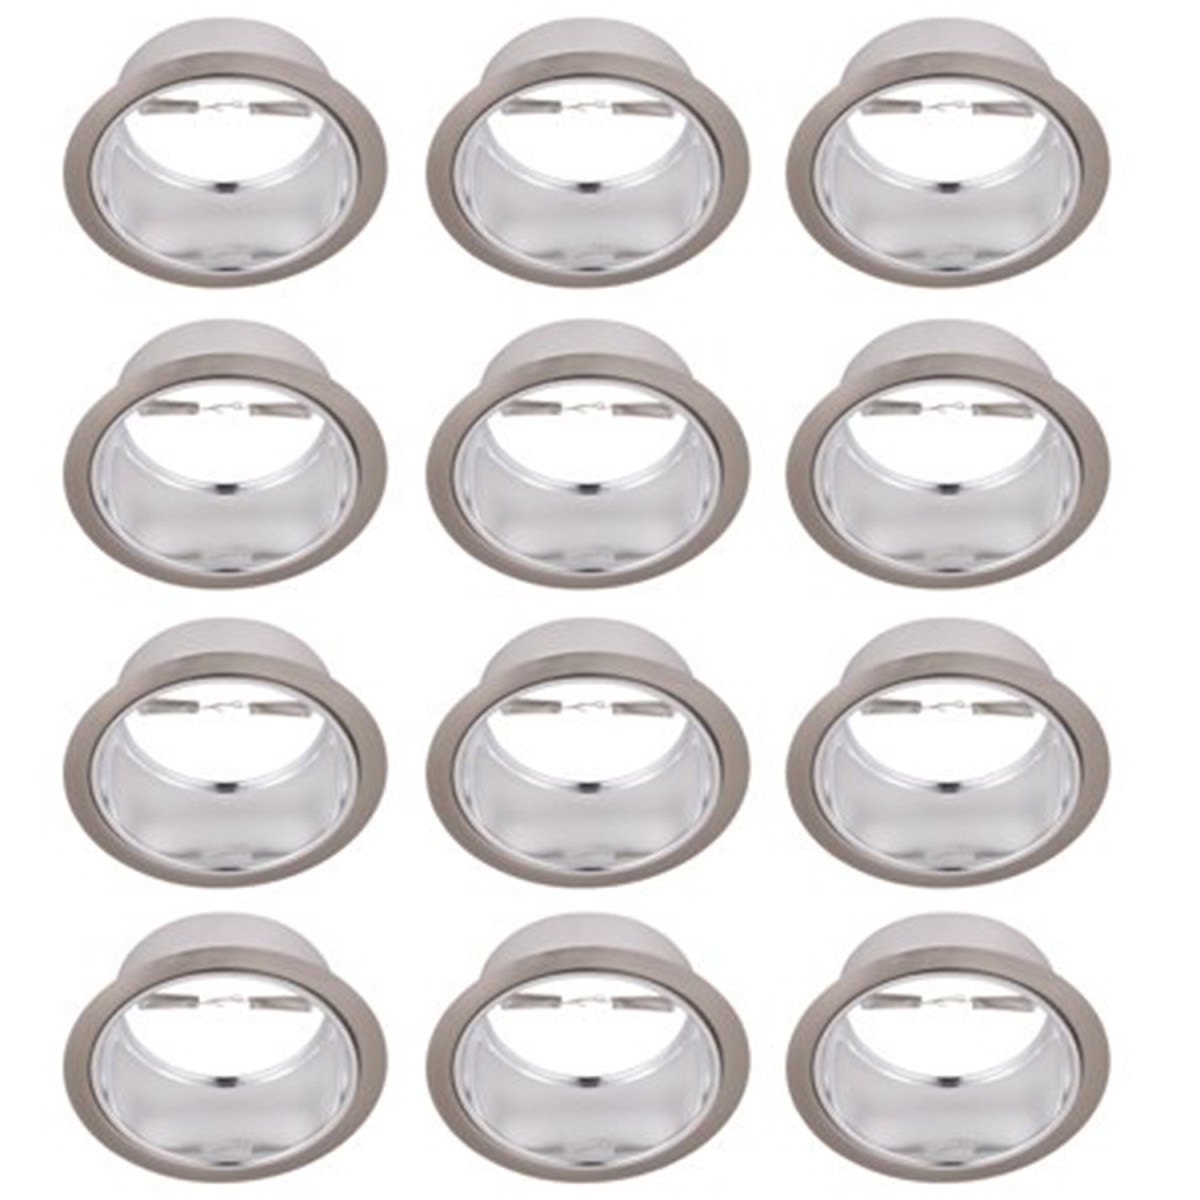 Res40cb-12pk 6 In. Trim With Chrome Reflector Brushed Nickel Trim Ring Fits Par38 R40 - Pack Of 12